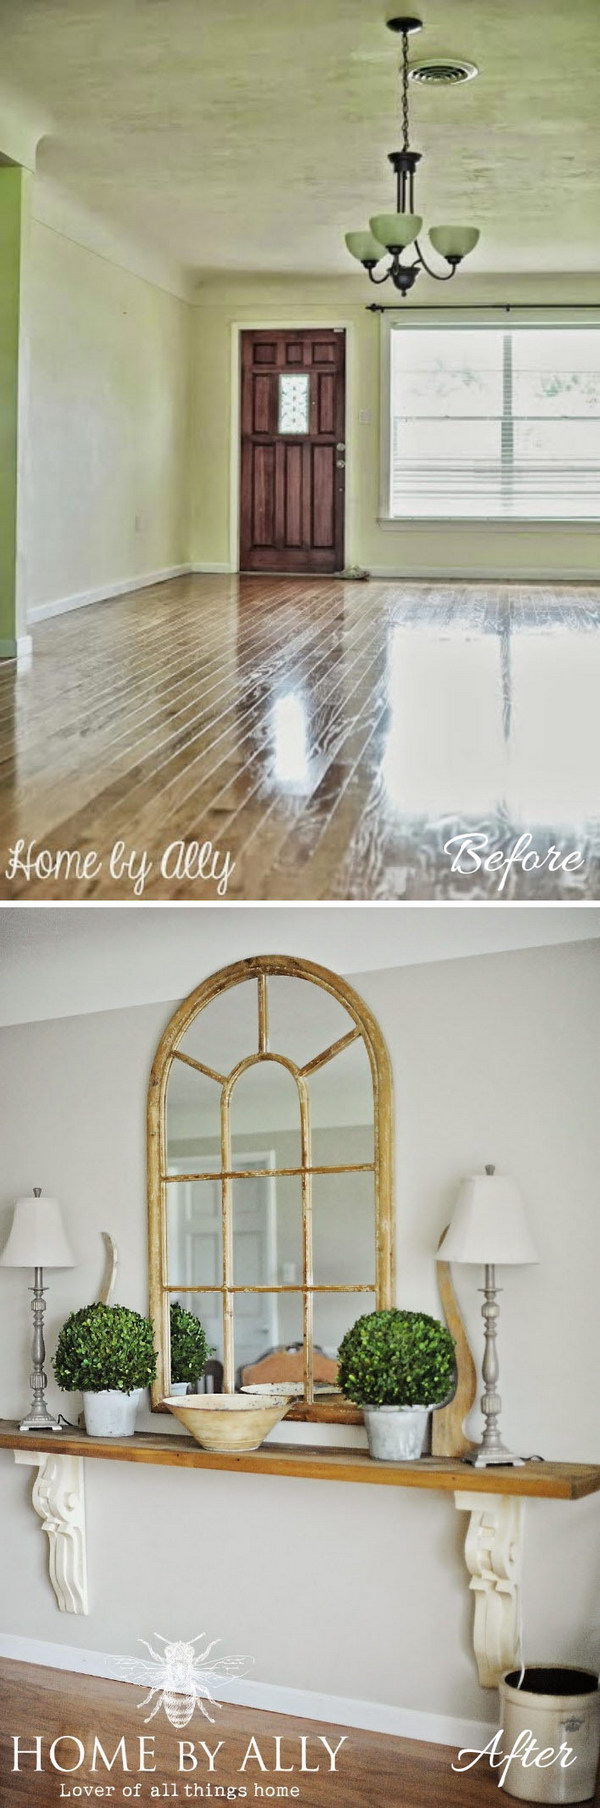 DIY Entryway Table Using Corbels or Architectural Salvage. 